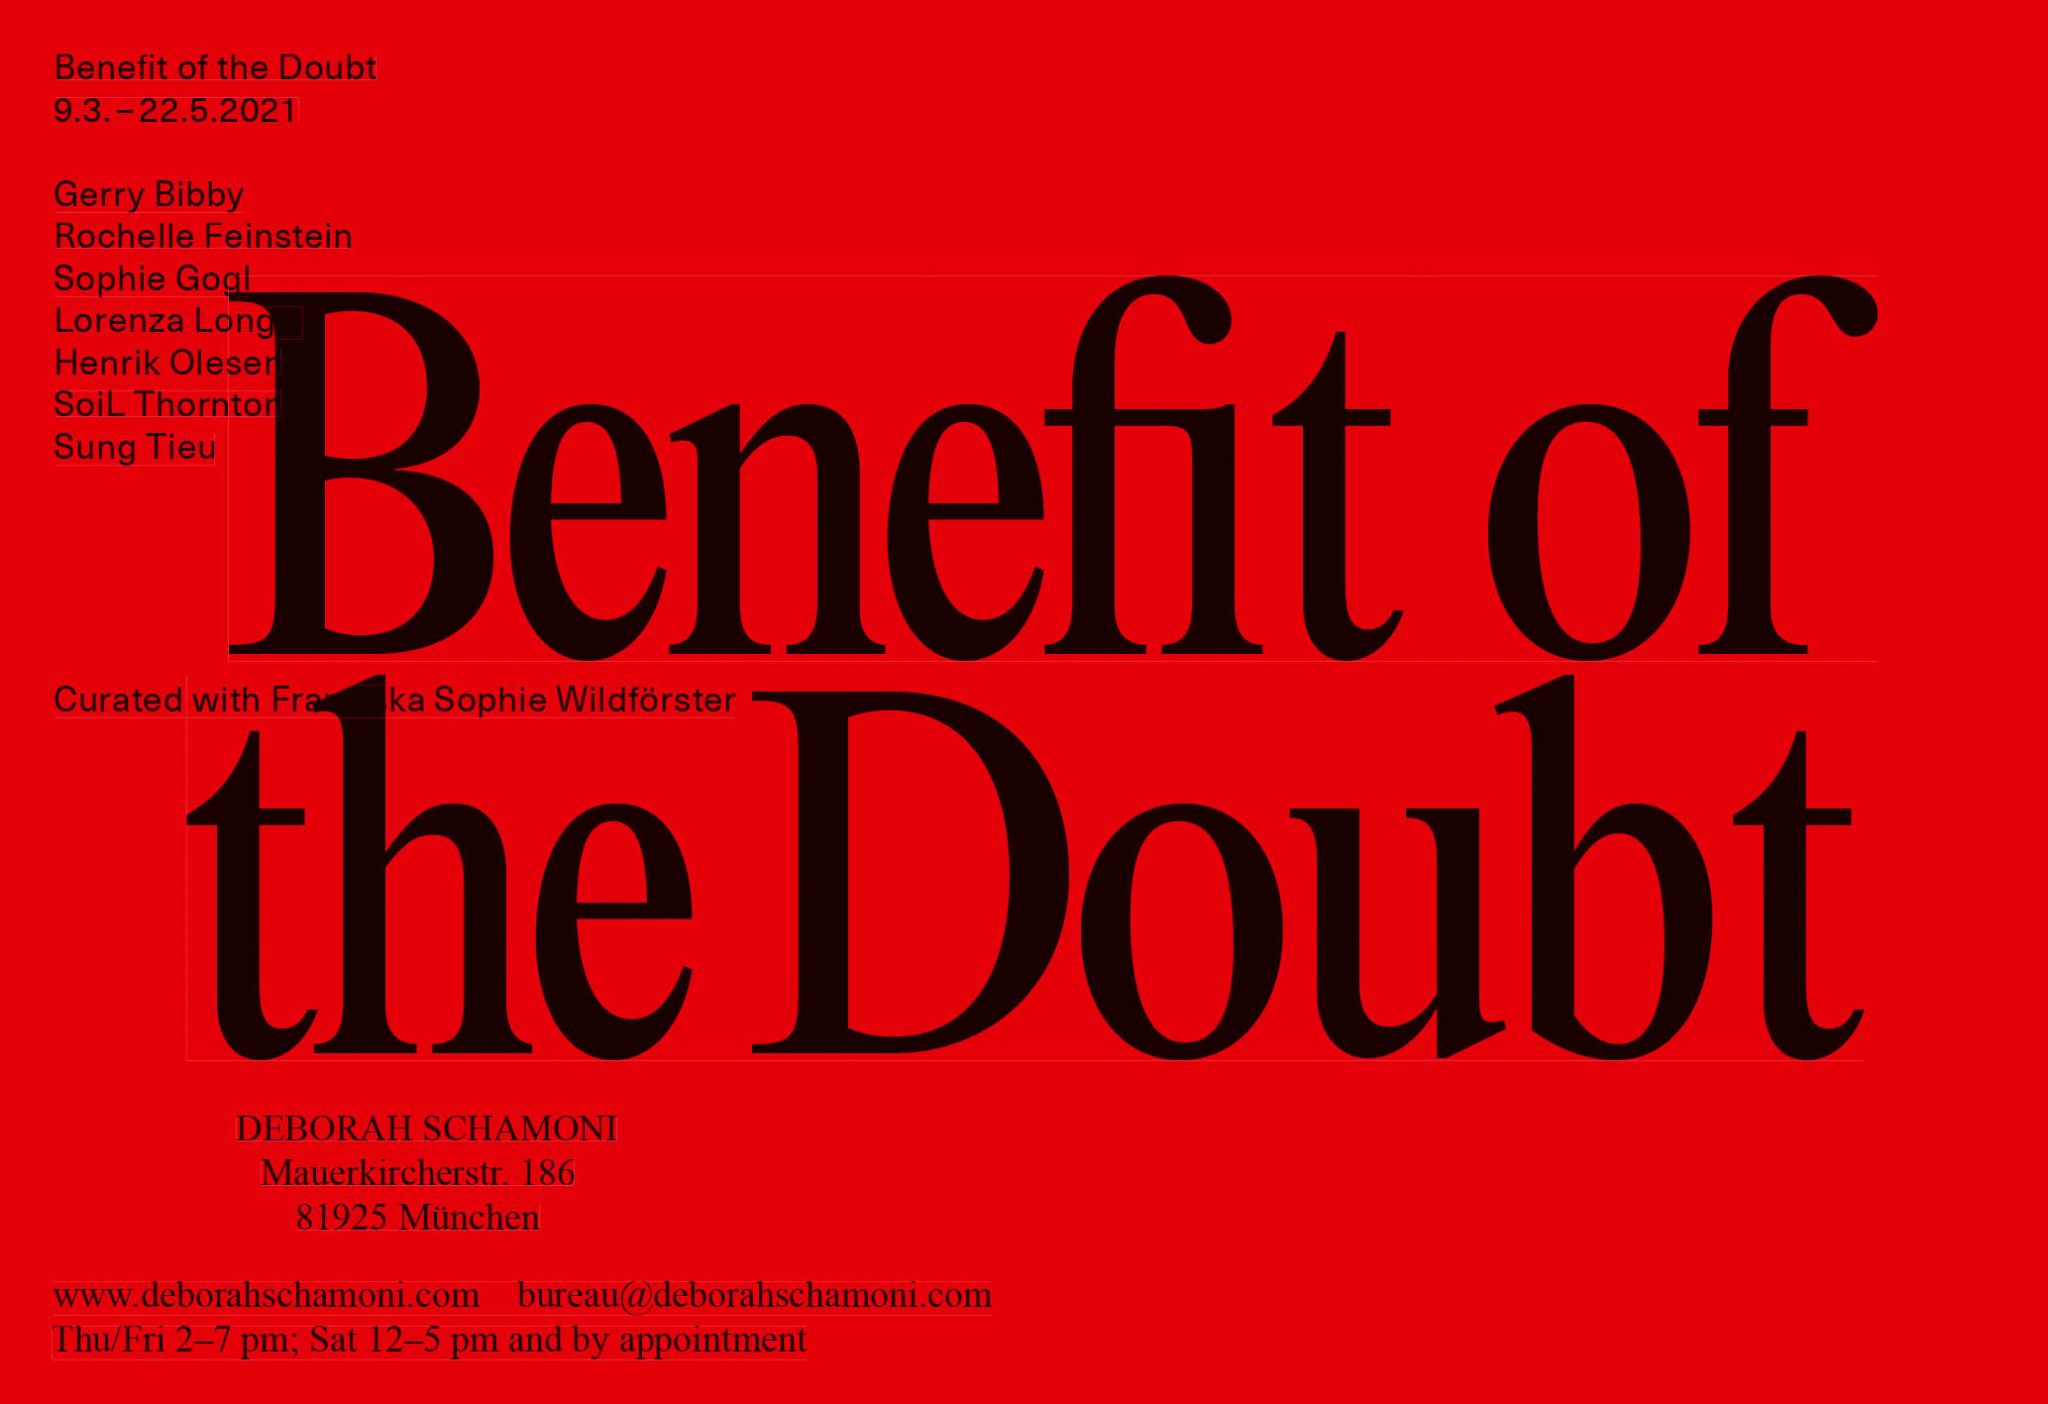 ds_202103_benefit-of-the-doubt_news